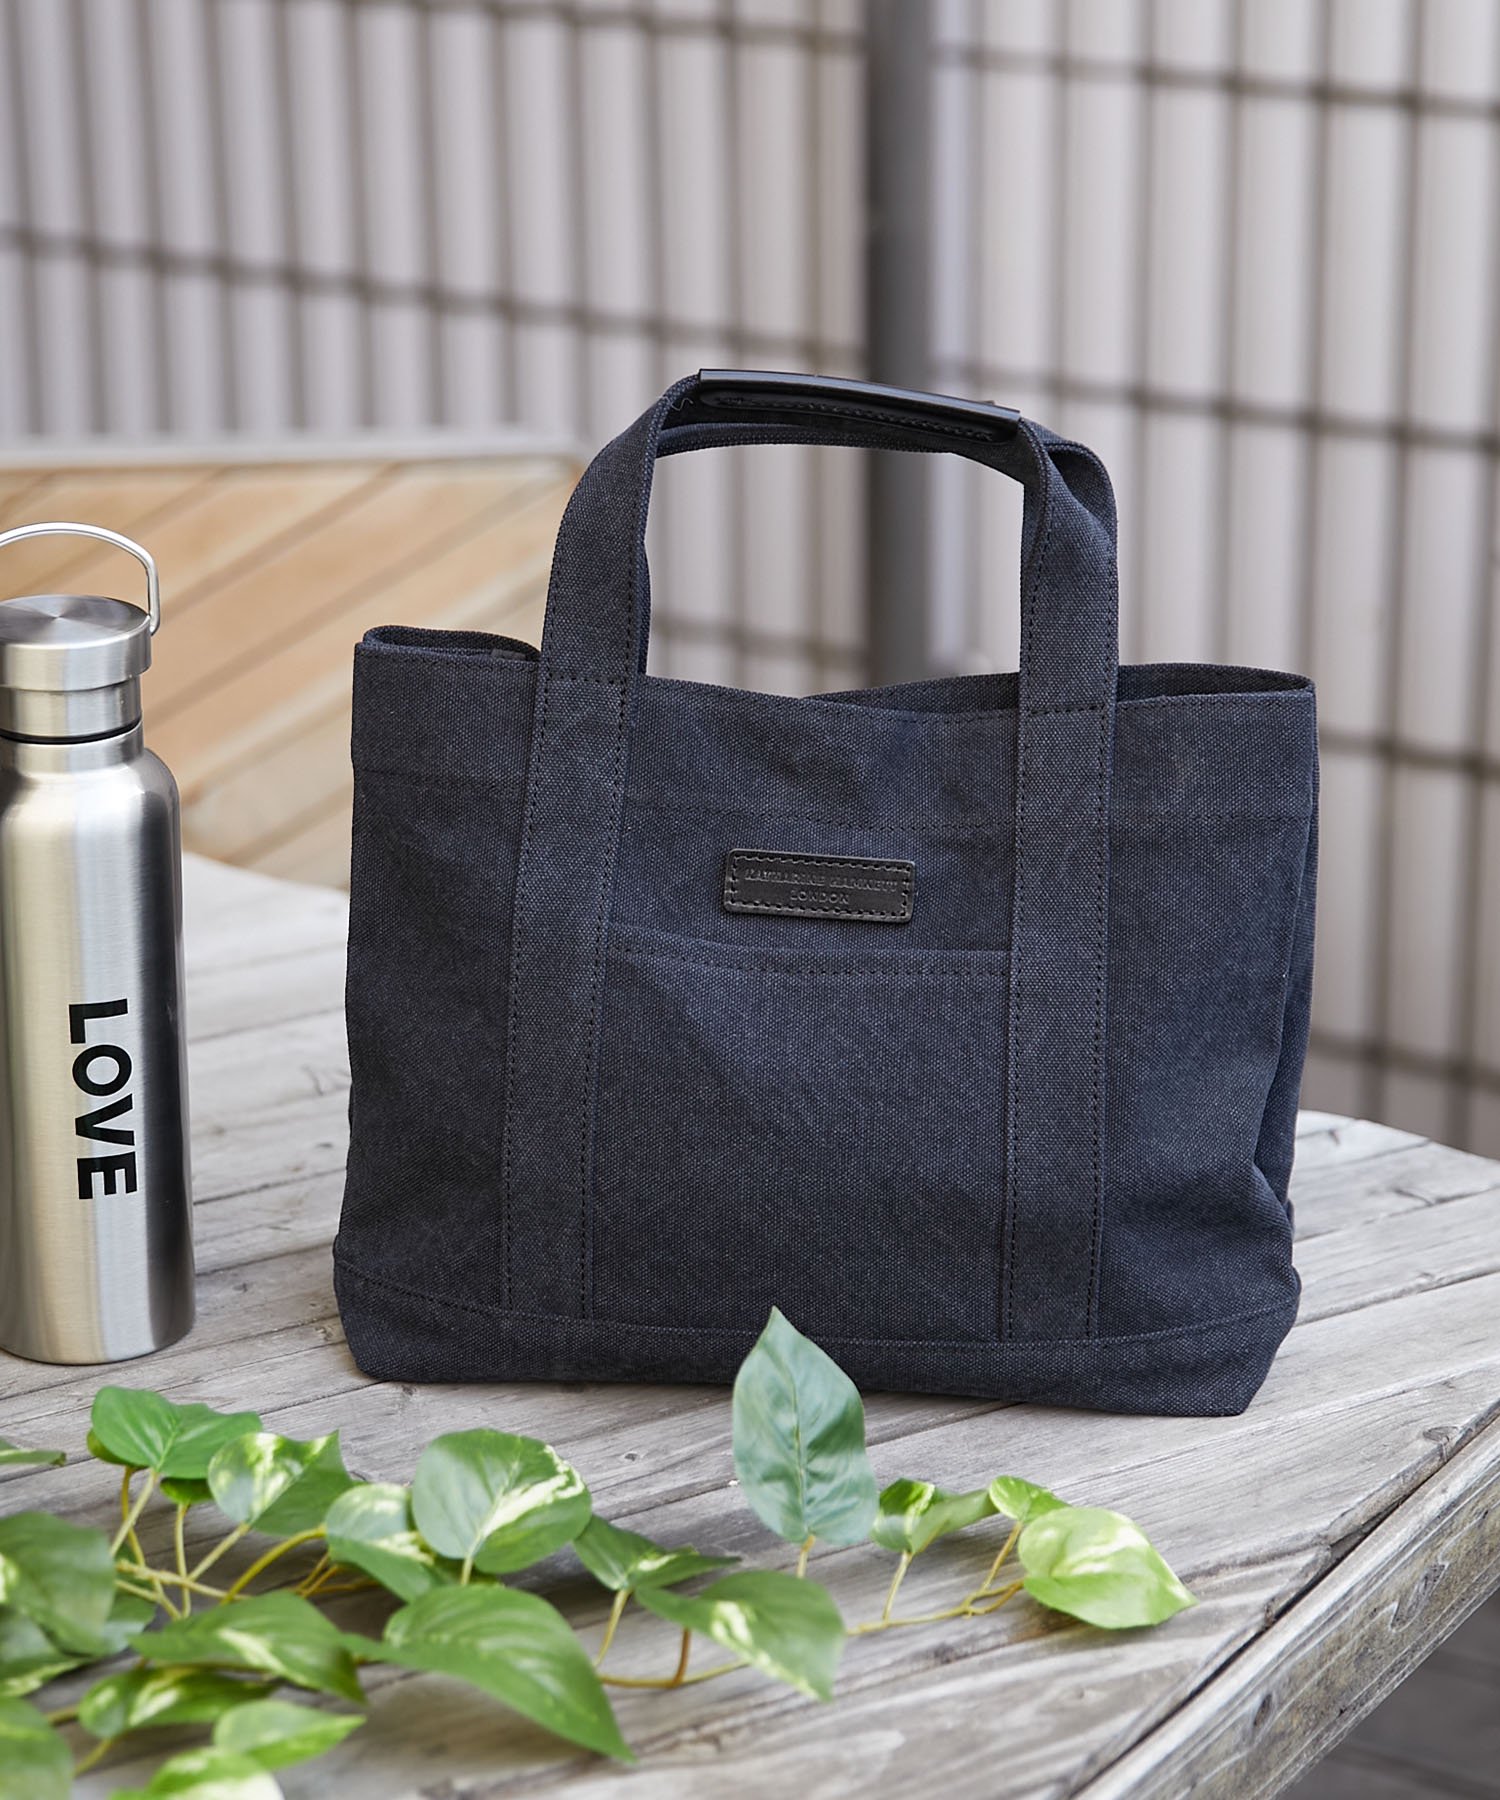 <img class='new_mark_img1' src='https://img.shop-pro.jp/img/new/icons15.gif' style='border:none;display:inline;margin:0px;padding:0px;width:auto;' />【KATHARINE HAMNETT LONDON】SMALL TOTE BAG（BLK）